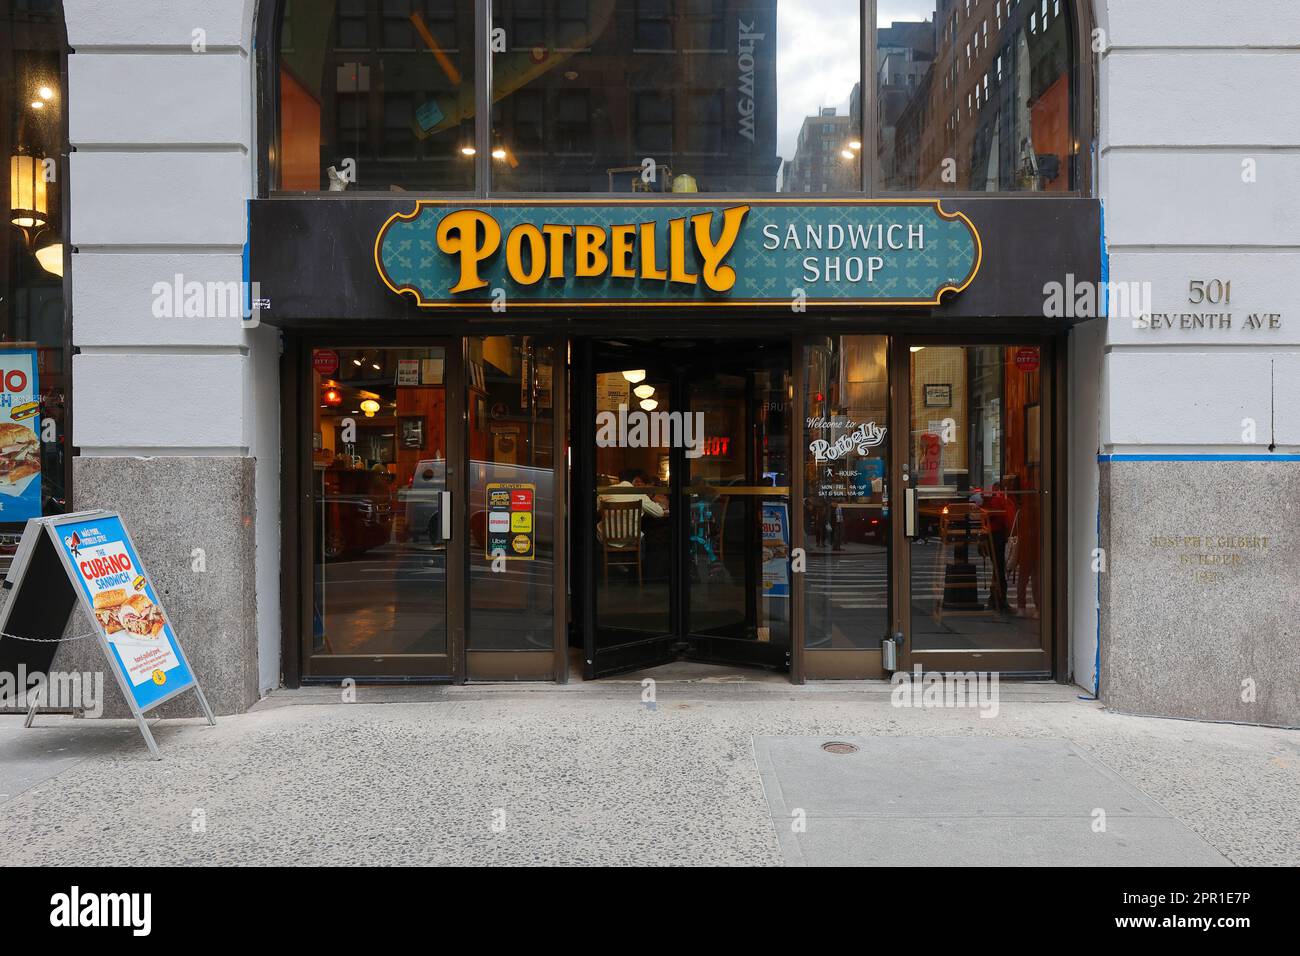 Potbelly Sandwich Shop, 501 7th Ave, New York, NYC storefront photo of a fast casual submarine sandwiches and heros in Midtown Manhattan. Stock Photo